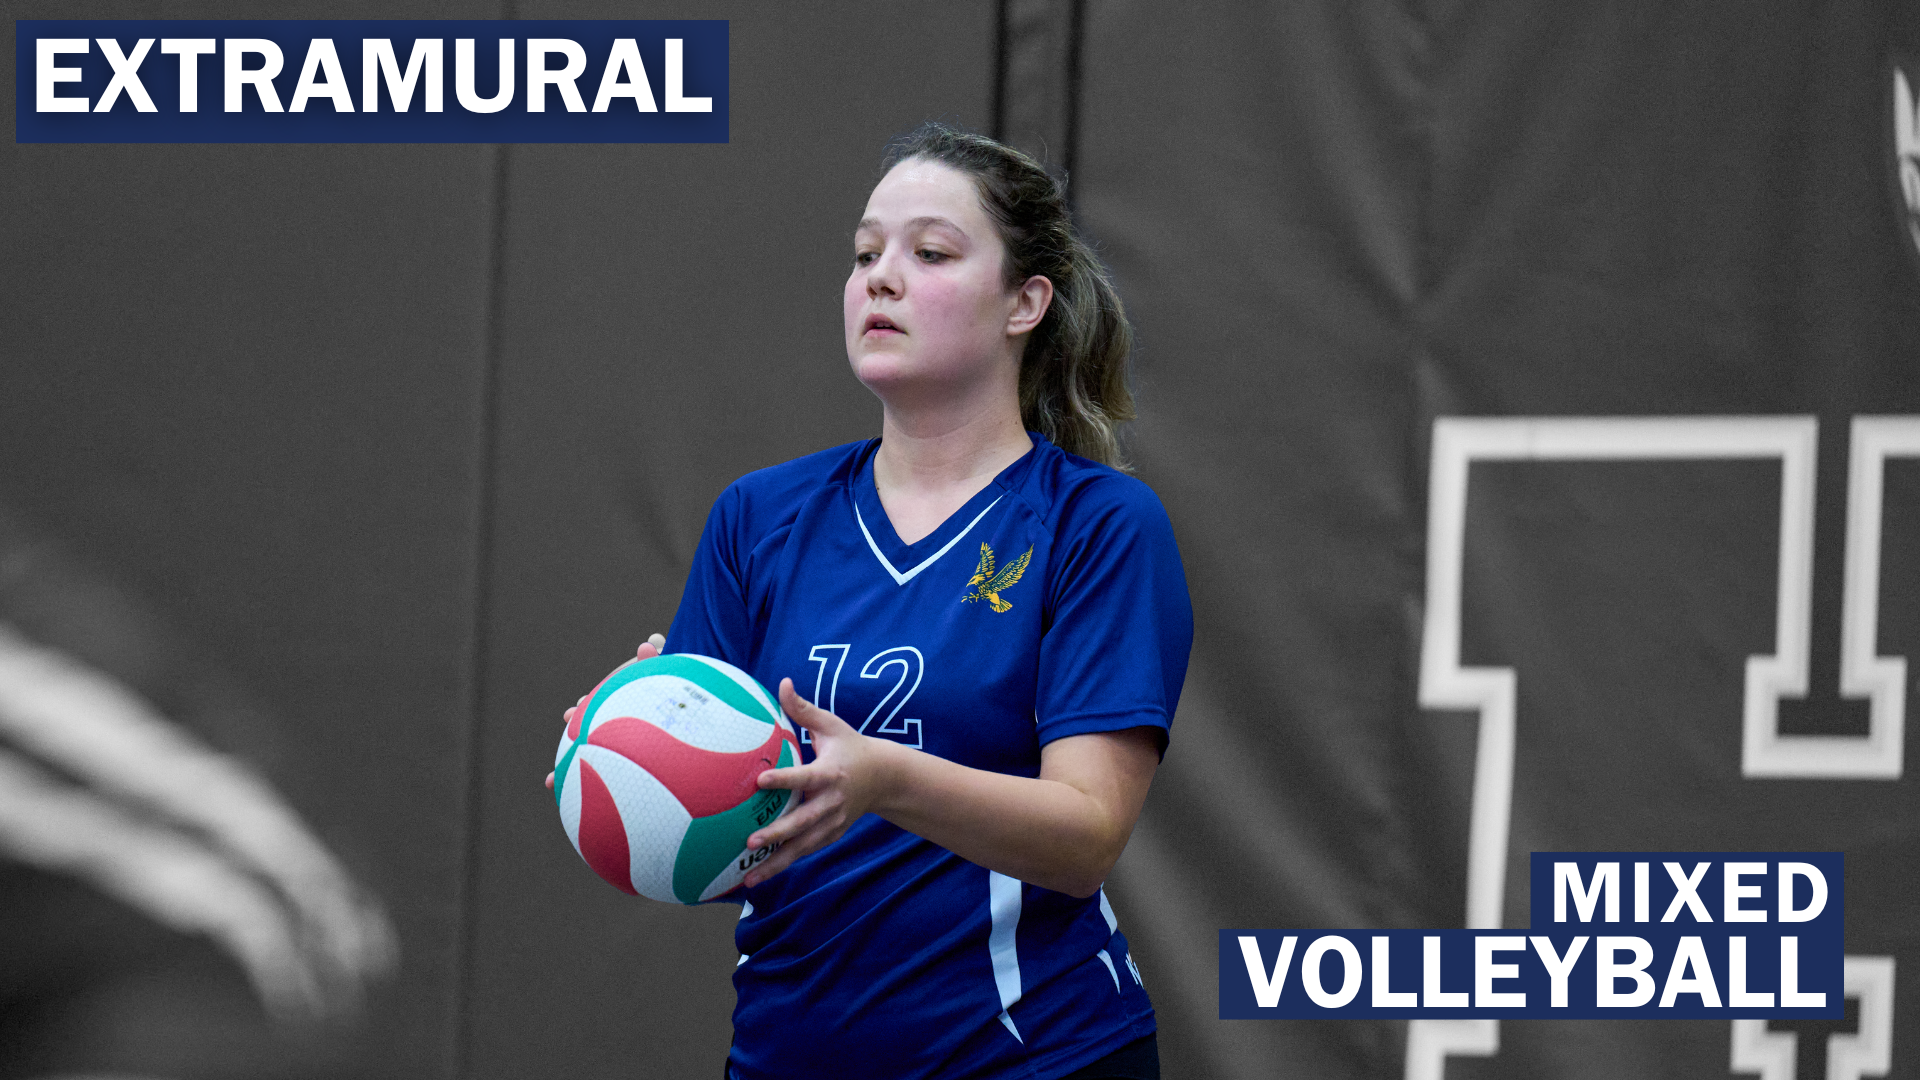 Extramural Mixed Volleyball